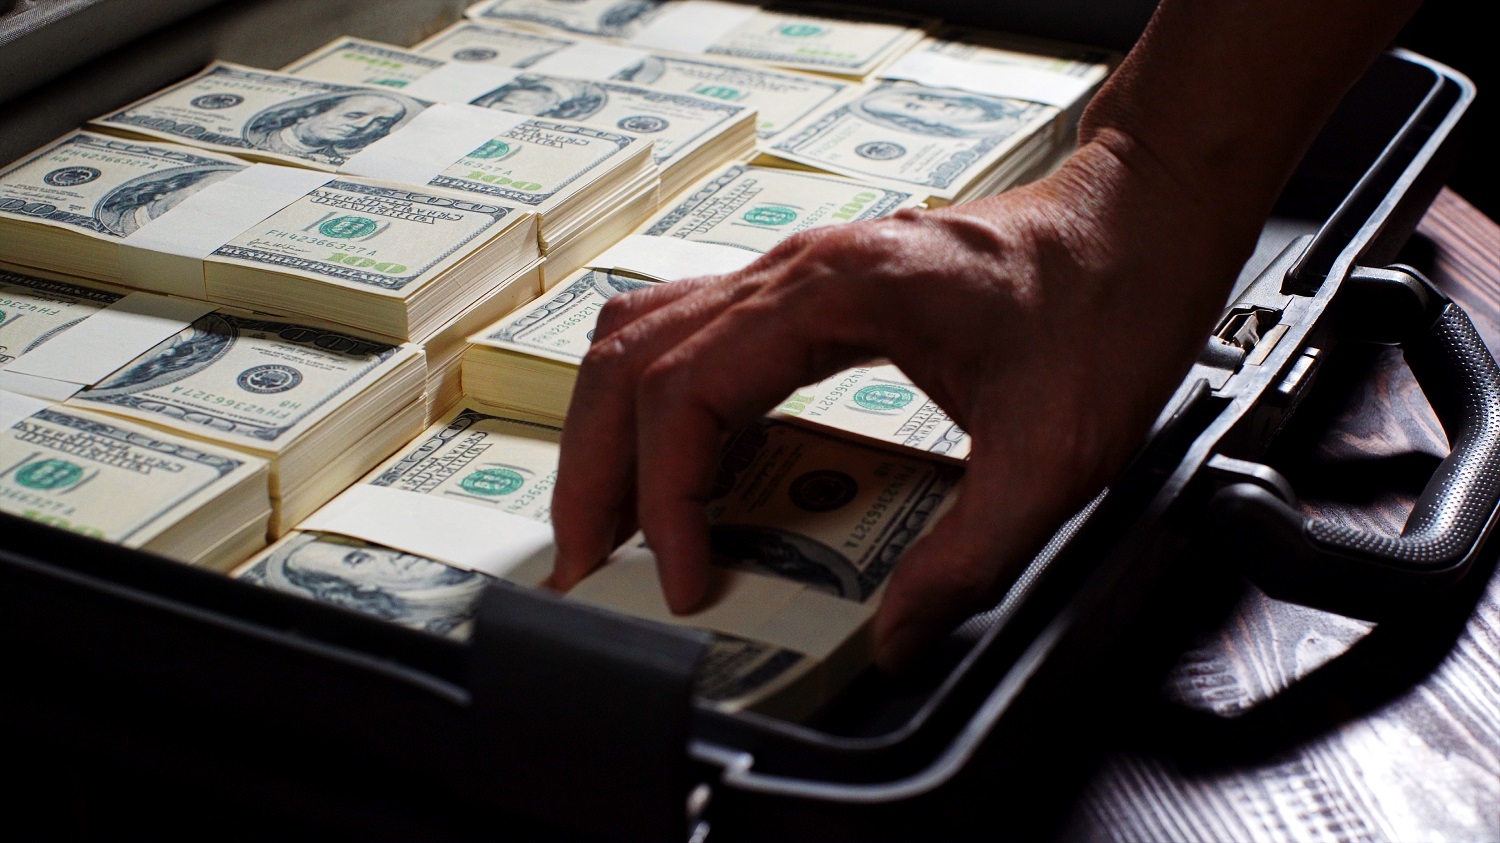 A person&rsquo;s hand grabs a pile of US dollar bills from a suitcase filled with bundles of cash.